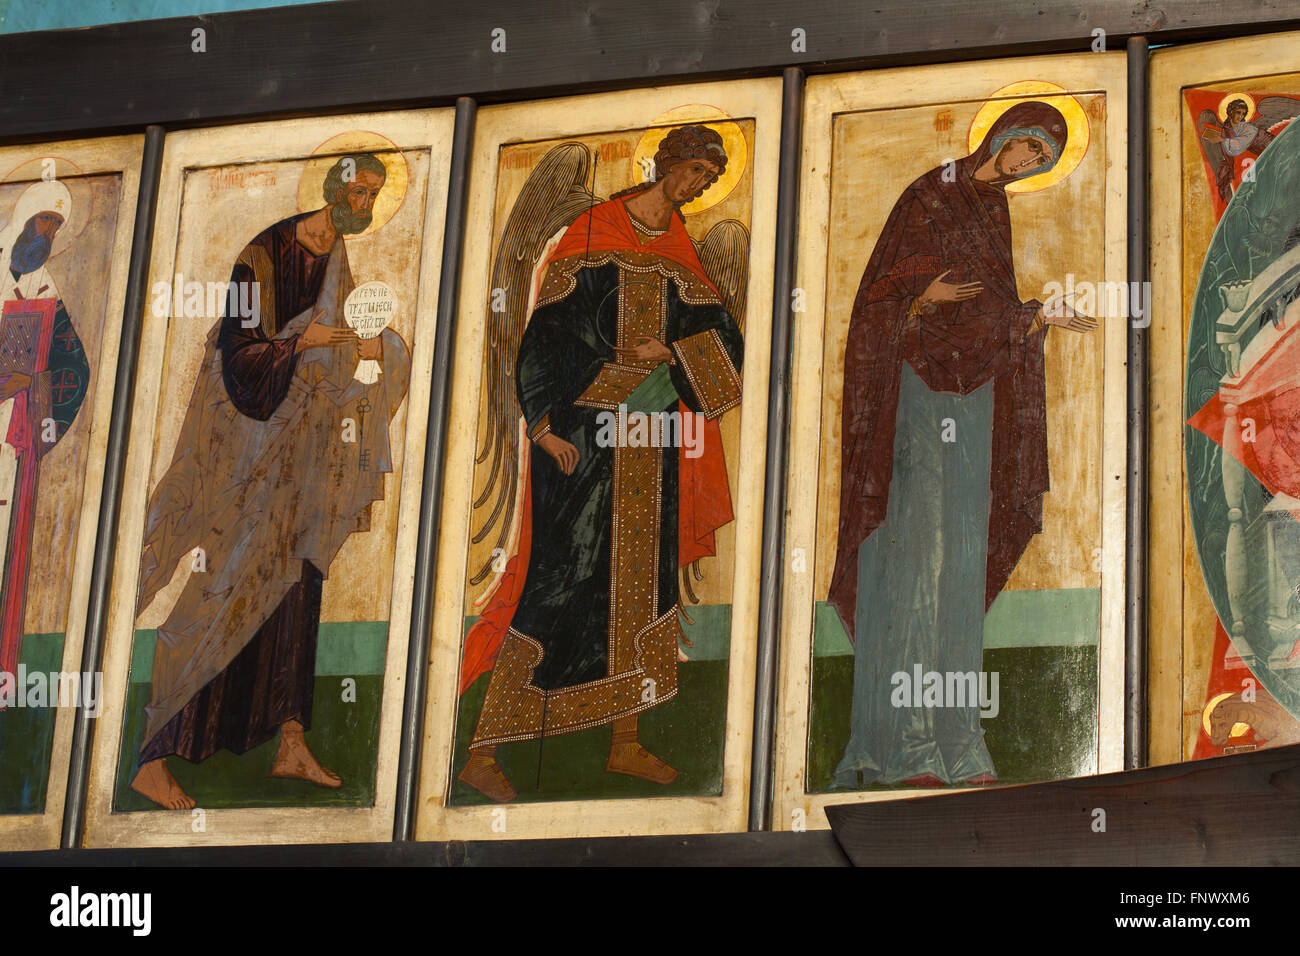 Saint Peter, Archangel Michael and Virgin Mary. Icons by Russian icon painter Kirill Katkov (1905-1995) in the deesis row of the iconostasis of the Dormition Church at the Olsany Cemetery in Prague, Czech Republic. The Dormition Church designed by Russian architect Vladimir Brandt (1887-1944) was built in 1924-1925 by the Russian white emigration in Czechoslovakia. Mural paintings were realised in 1941-1945 by group of Russian icon painters after design by famous Russian book illustrator Ivan Bilibin (1876-1942) from 1926-1928. Stock Photo